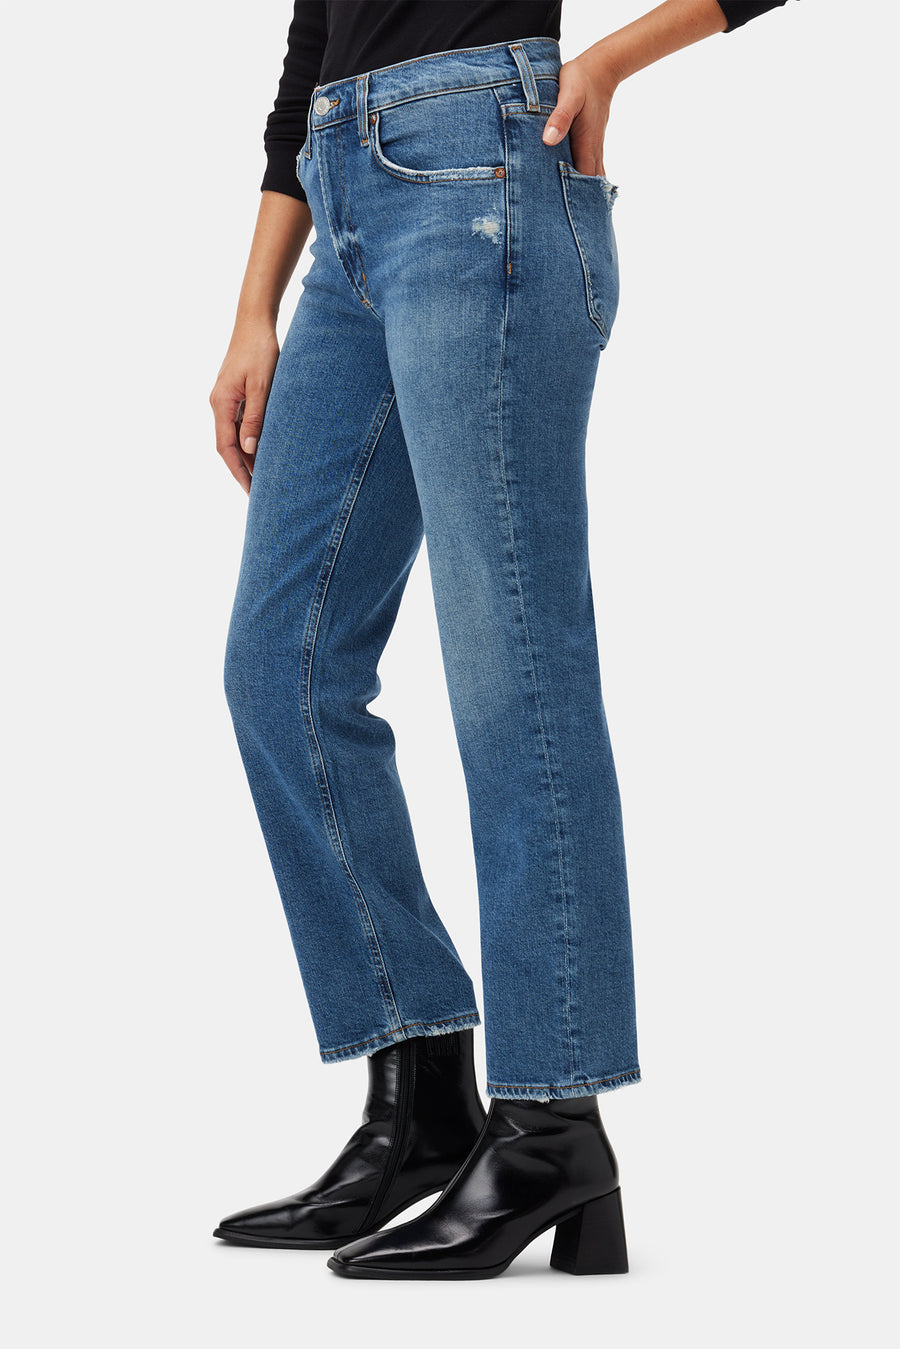 AGOLDE Kye Mid Rise Straight Crop - Notions